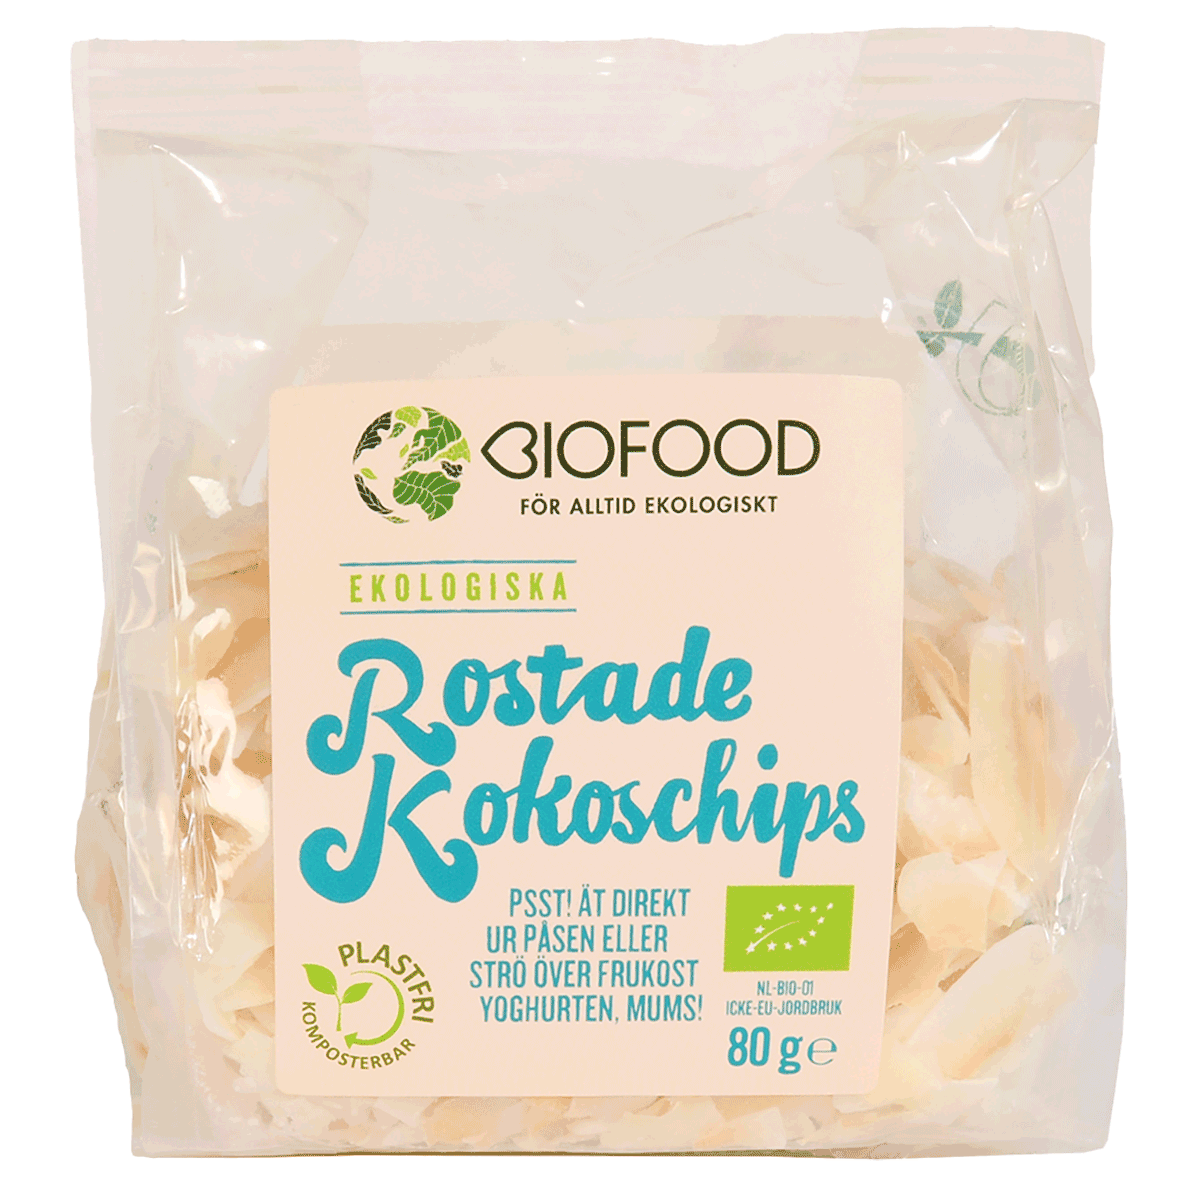 Biofood's Coconut Chips Roasted '